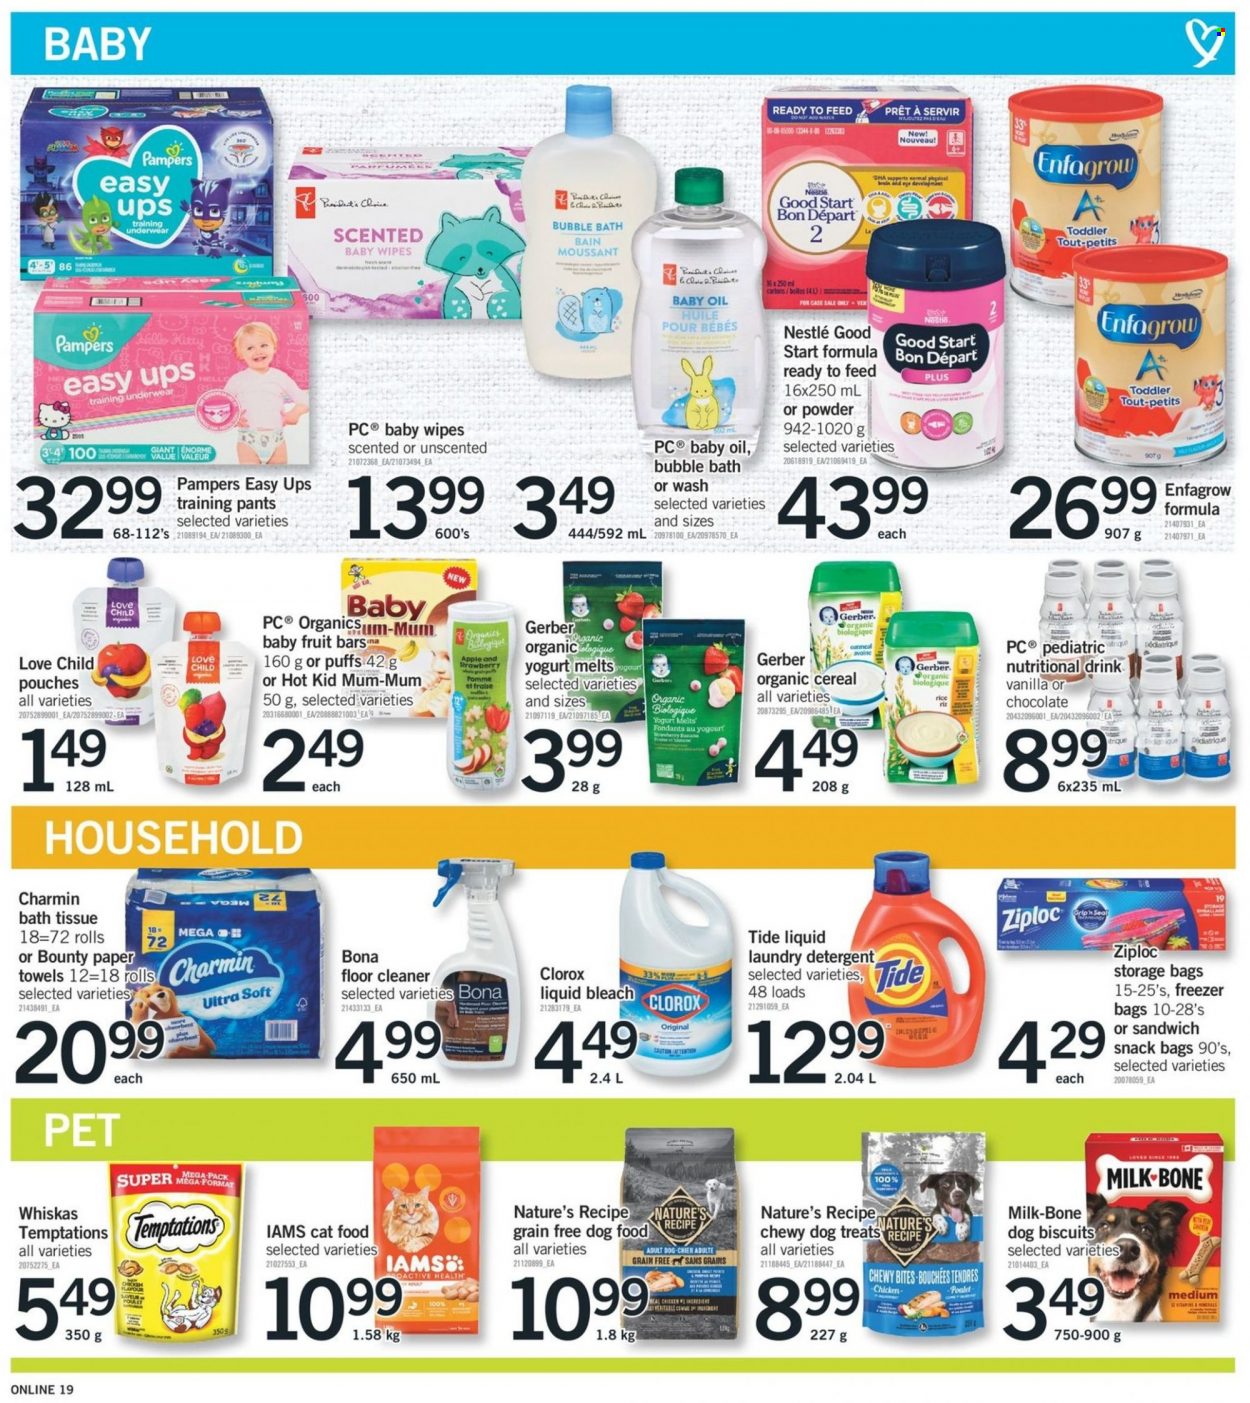 thumbnail - Fortinos Flyer - May 26, 2022 - June 01, 2022 - Sales products - puffs, sandwich, Président, yoghurt, milk, chocolate, Bounty, Gerber, oatmeal, cereals, rice, alcohol, wipes, pants, baby wipes, baby pants, baby oil, bath tissue, kitchen towels, paper towels, Charmin, cleaner, bleach, floor cleaner, Clorox, Tide, laundry detergent, bubble bath, Mum, Ziploc, storage bag, freezer bag, animal food, animal treats, cat food, dog food, dog biscuits, Iams, freezer, underwear, detergent, Nestlé, Pampers, Whiskas. Page 18.